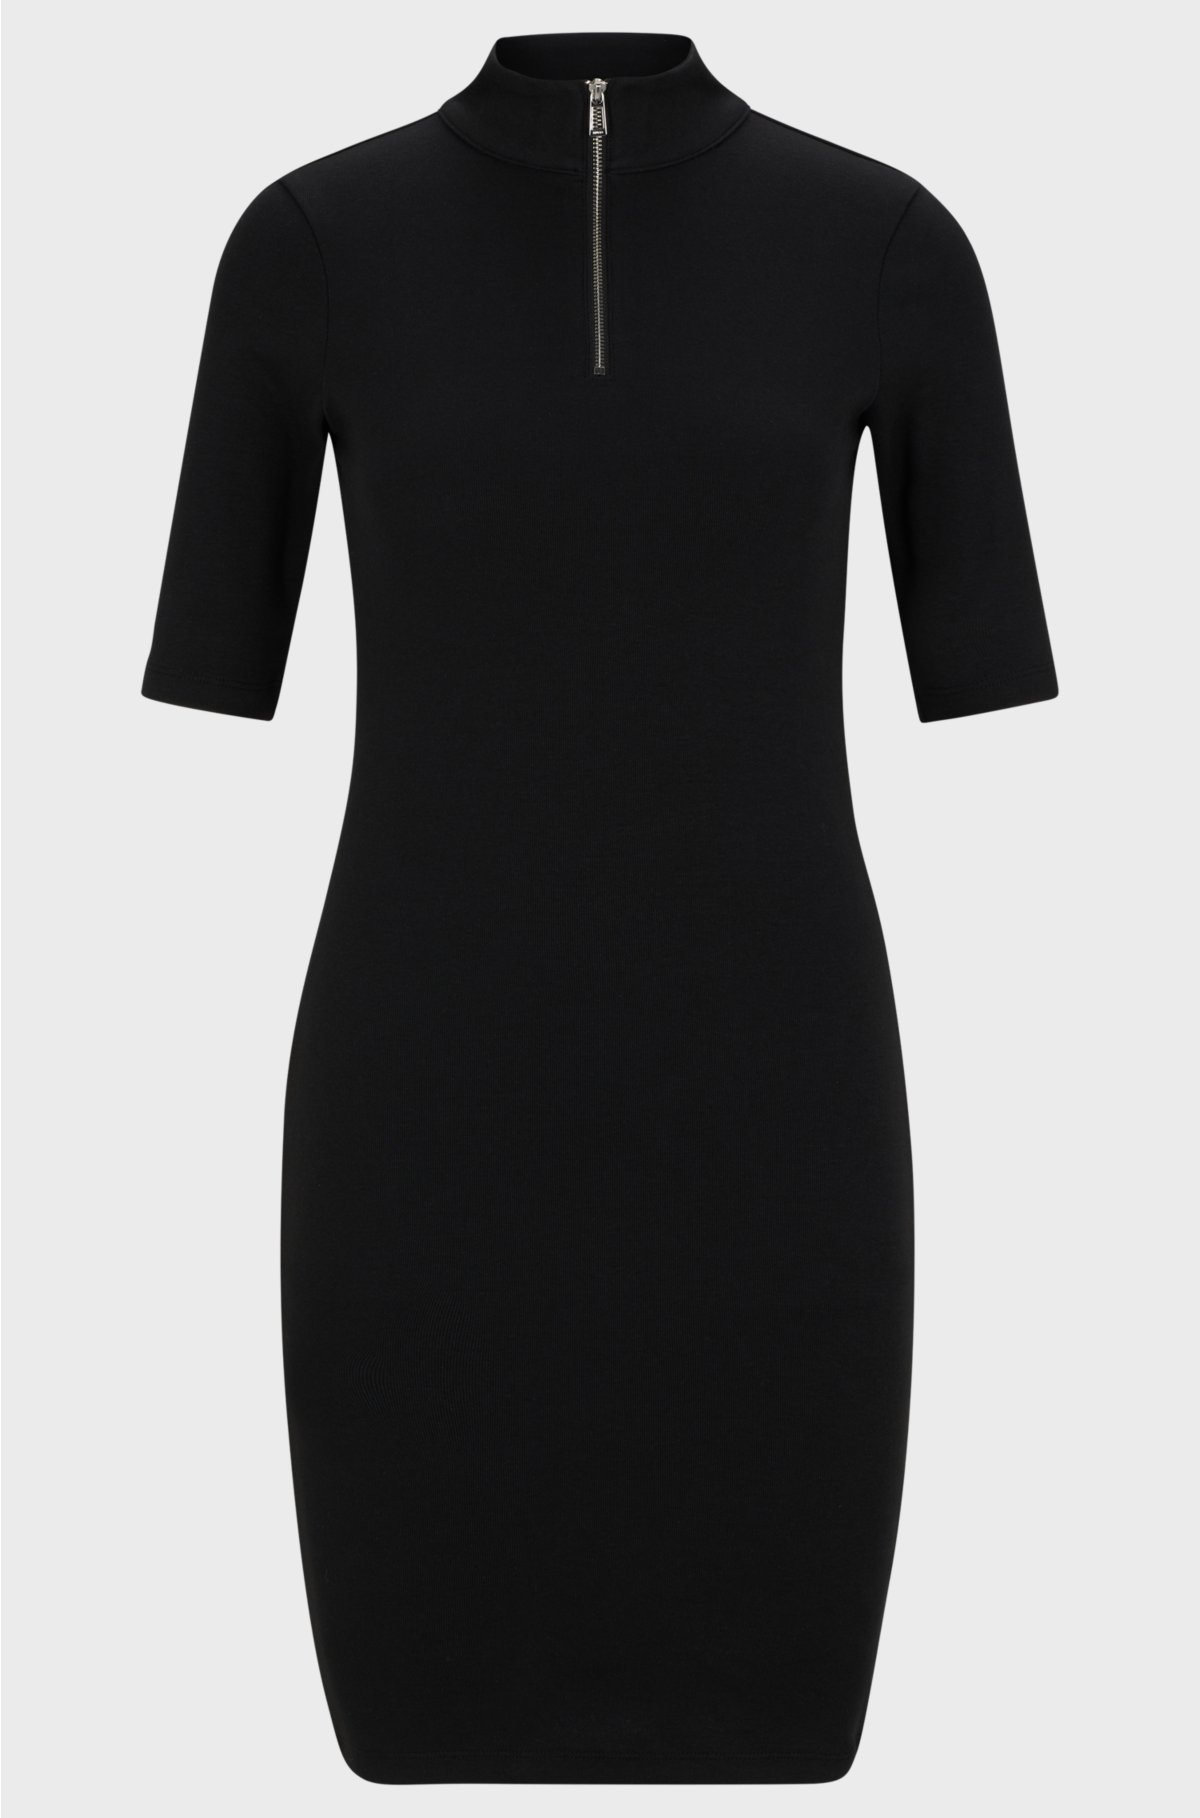 Zip-neck dress in stretch jersey with stacked logo, Black